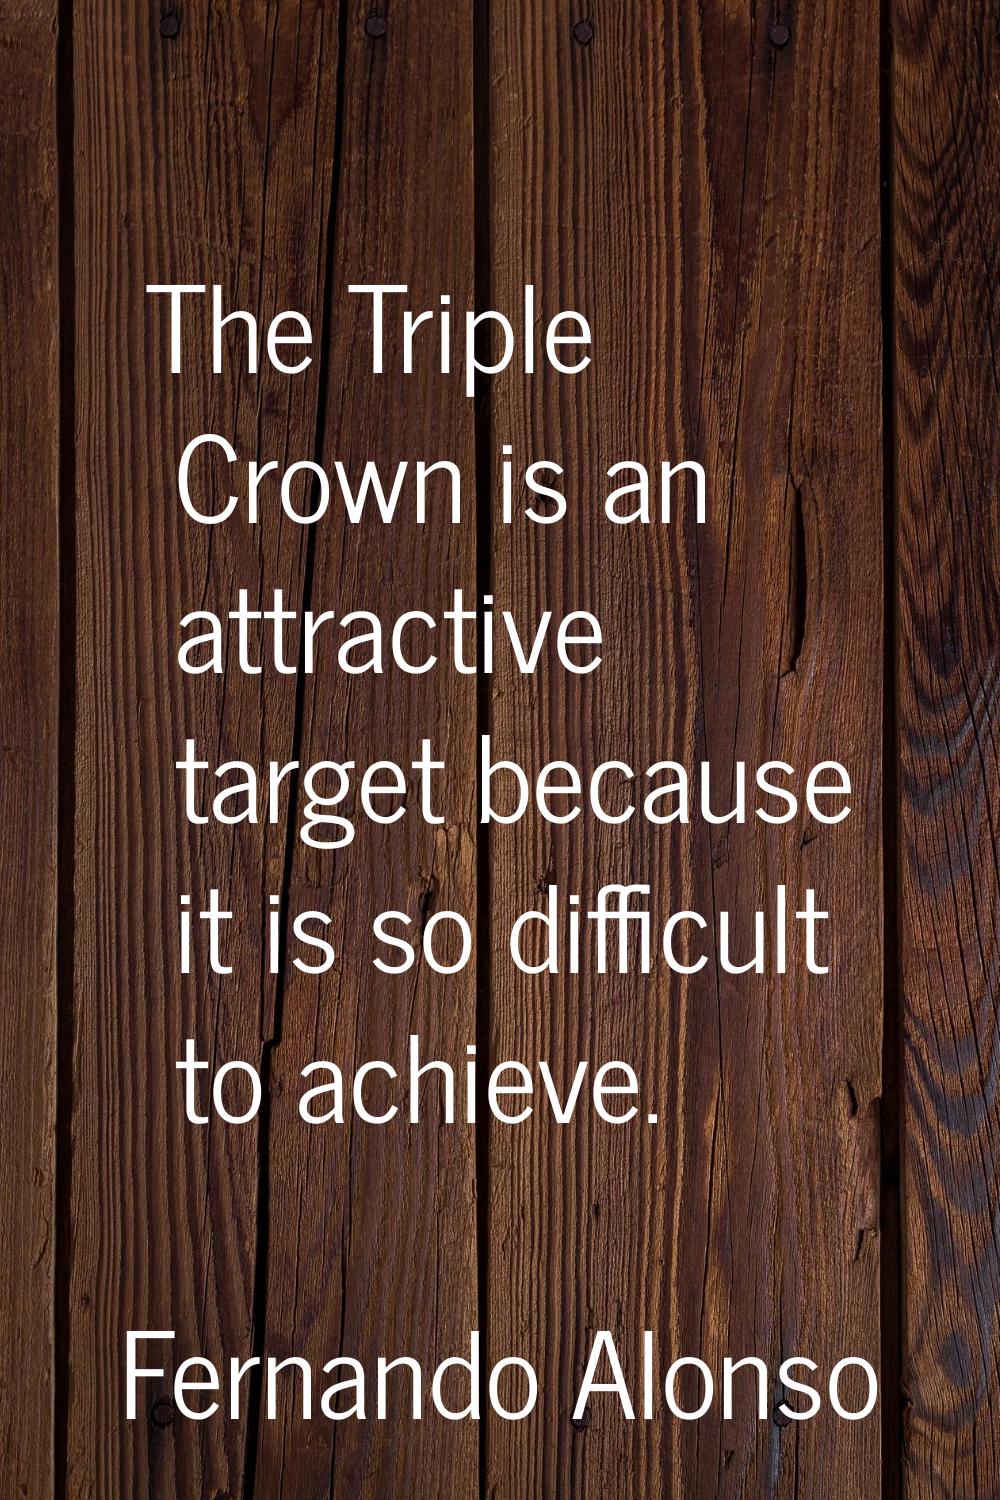 The Triple Crown is an attractive target because it is so difficult to achieve.